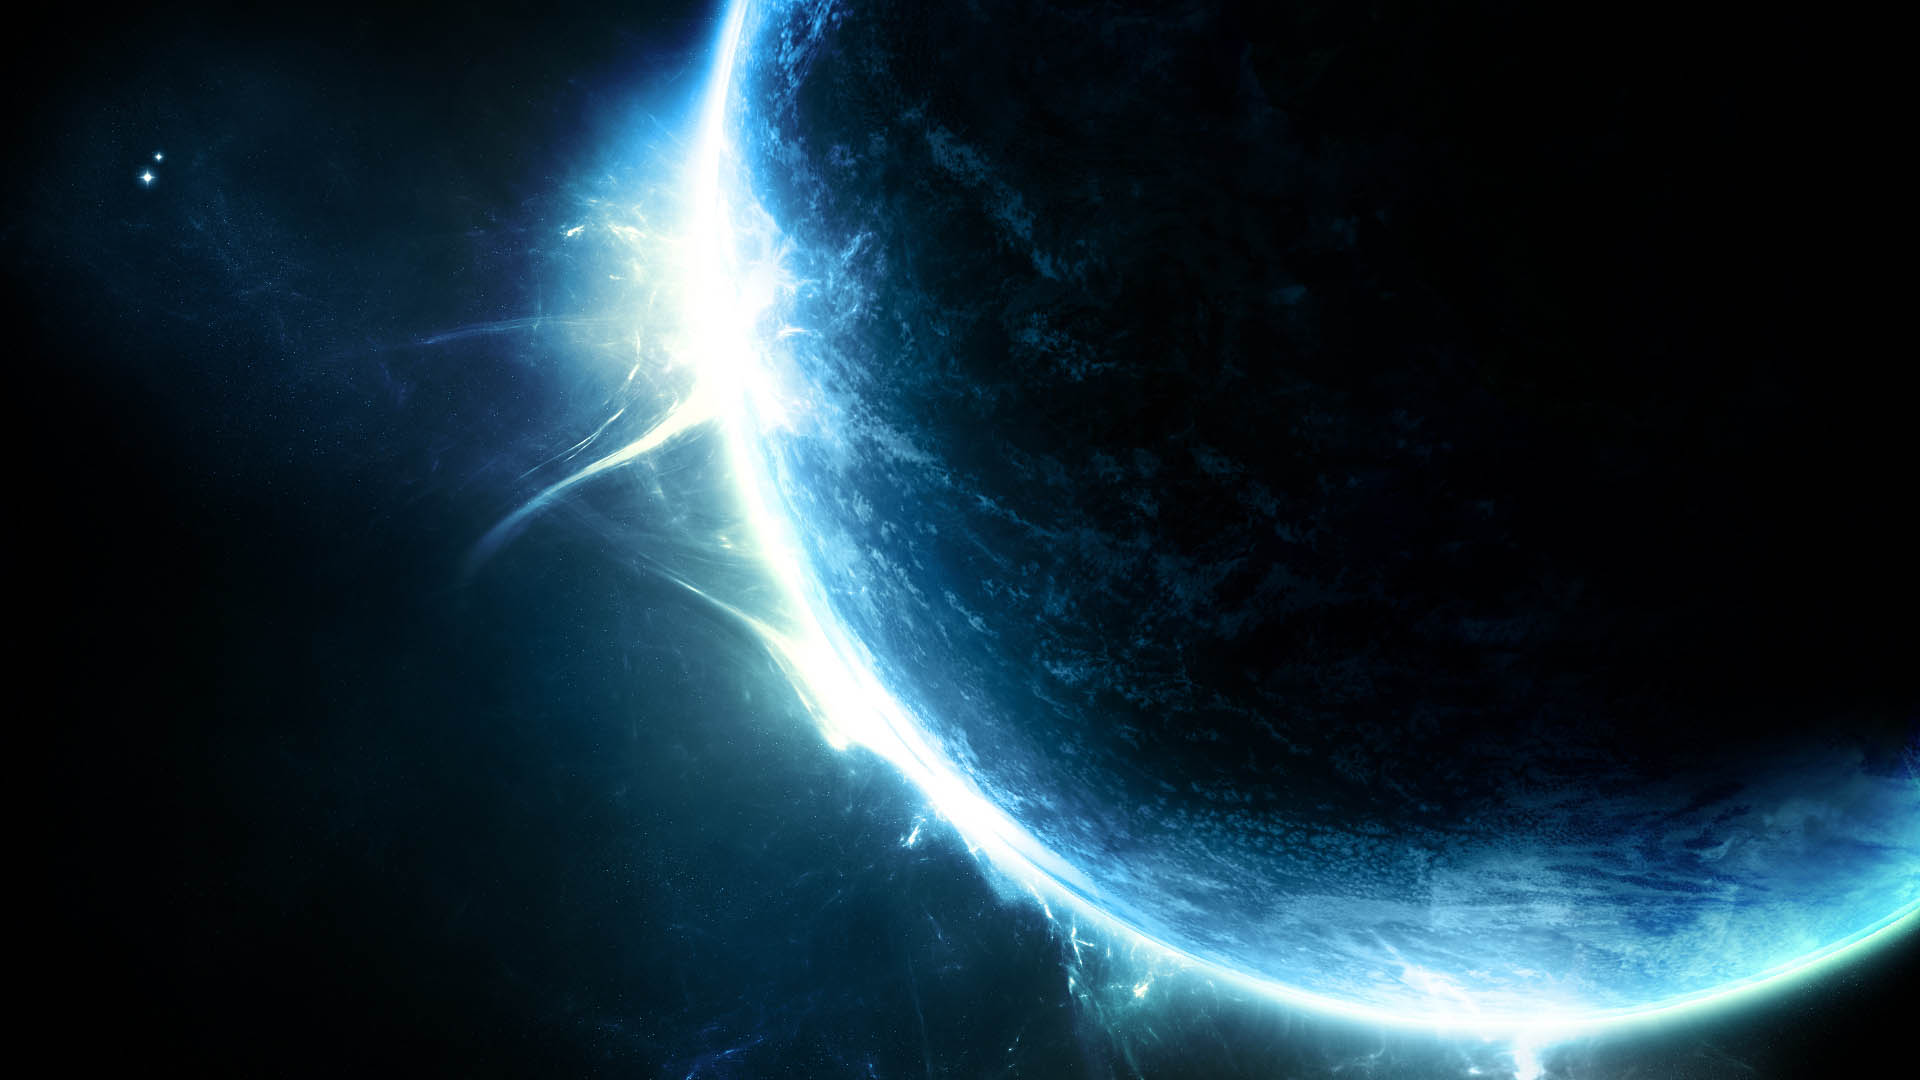 HD Space Wallpaper Background For